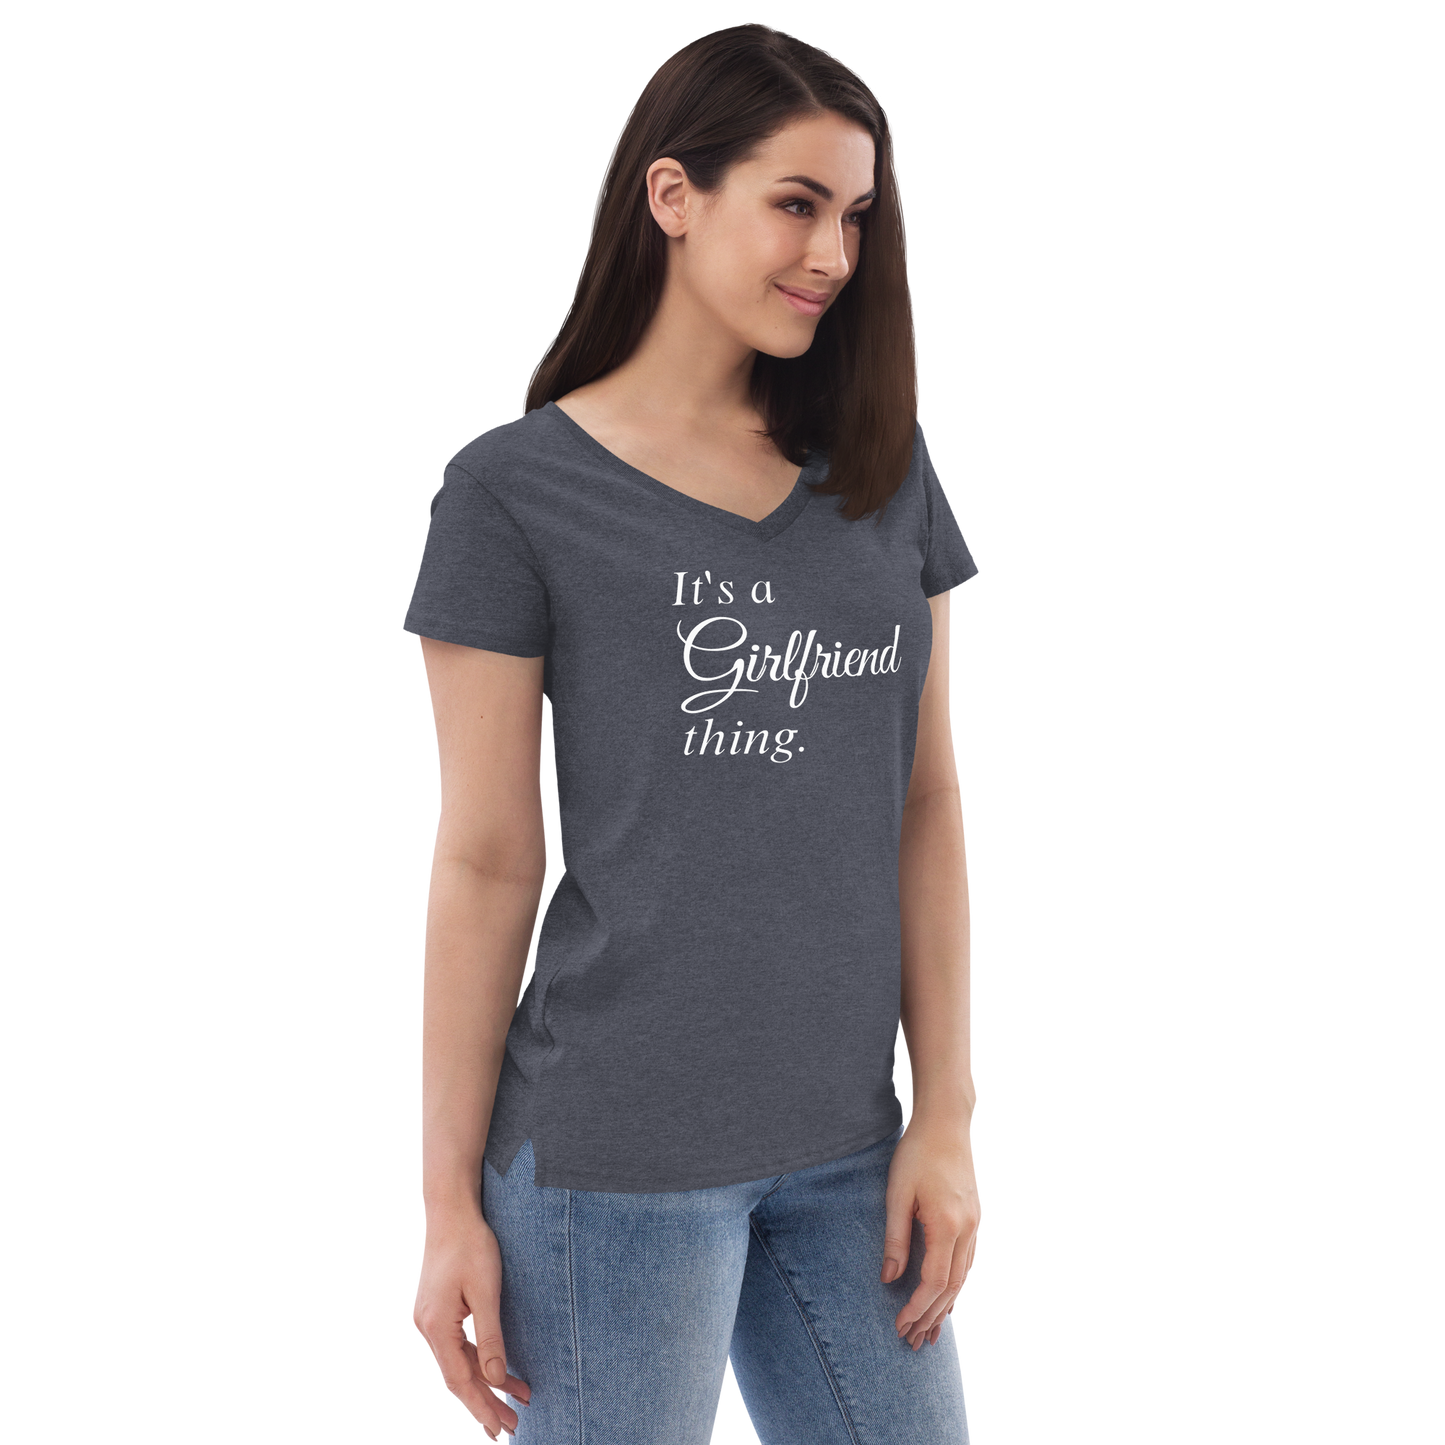 It's A Girlfriend Thing - Women’s Recycled V-Neck T-Shirt